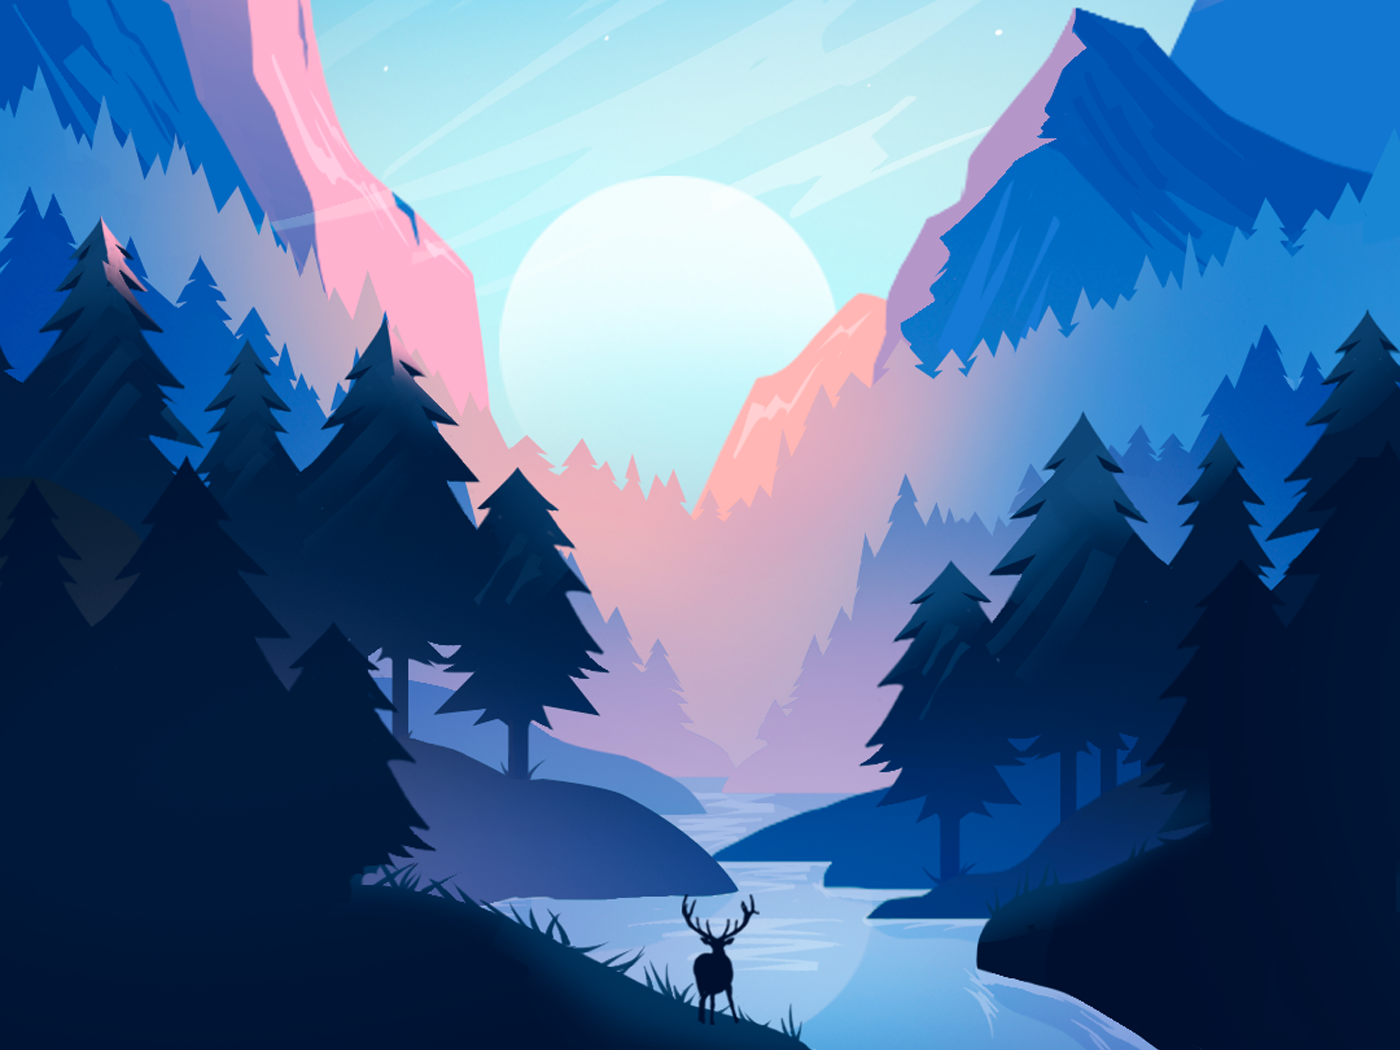 Nature Scenery Detail by YNG724 on Dribbble